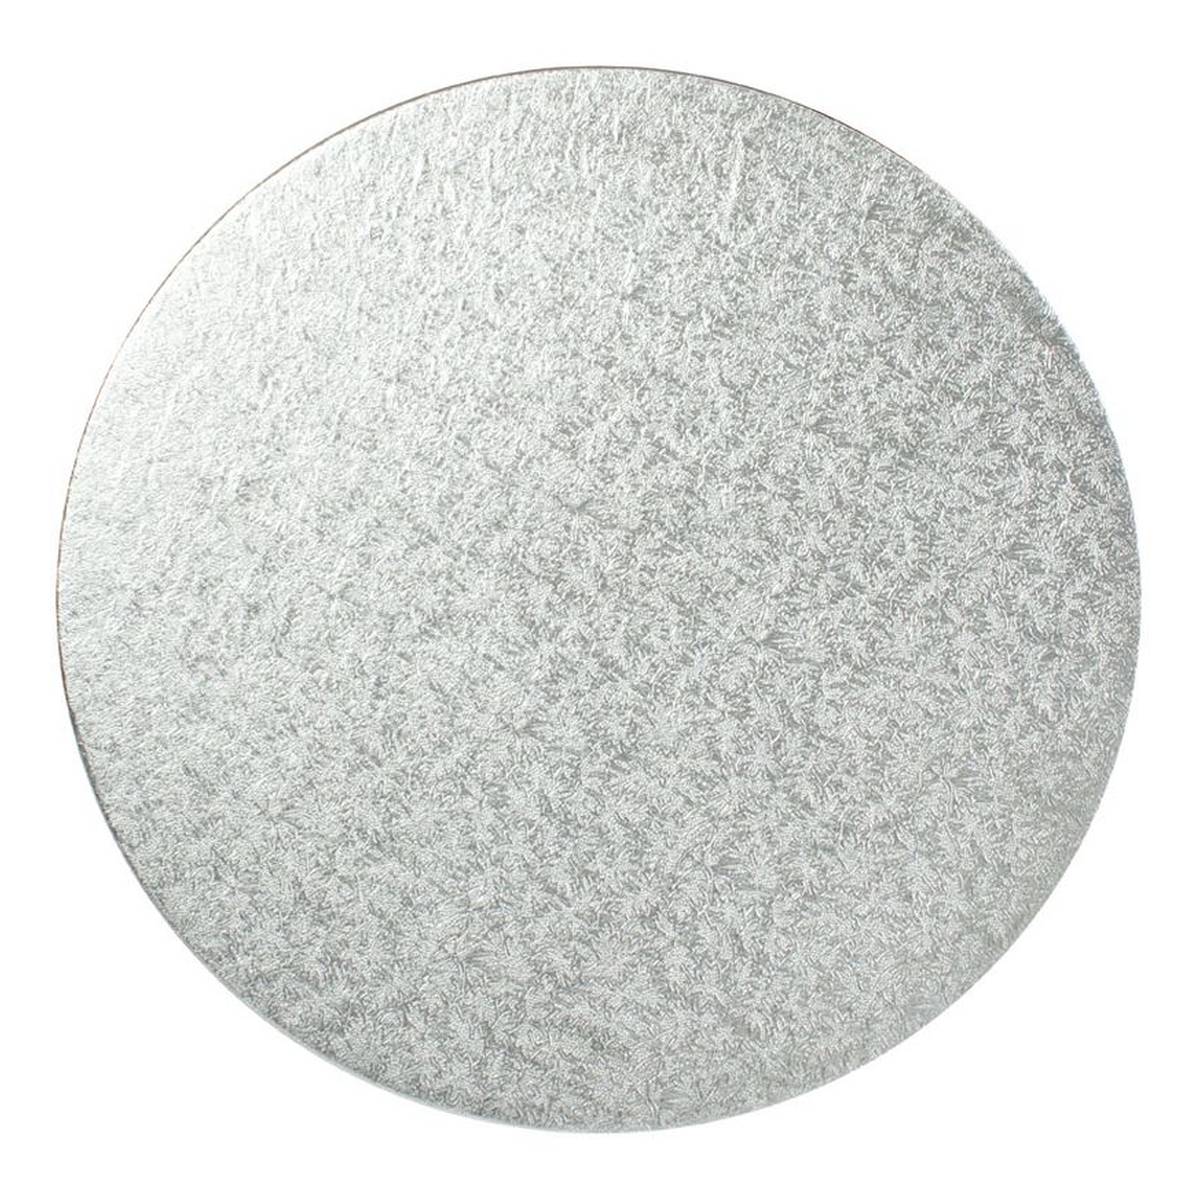 Silver Cake Board - 9 Inch Round - Packware